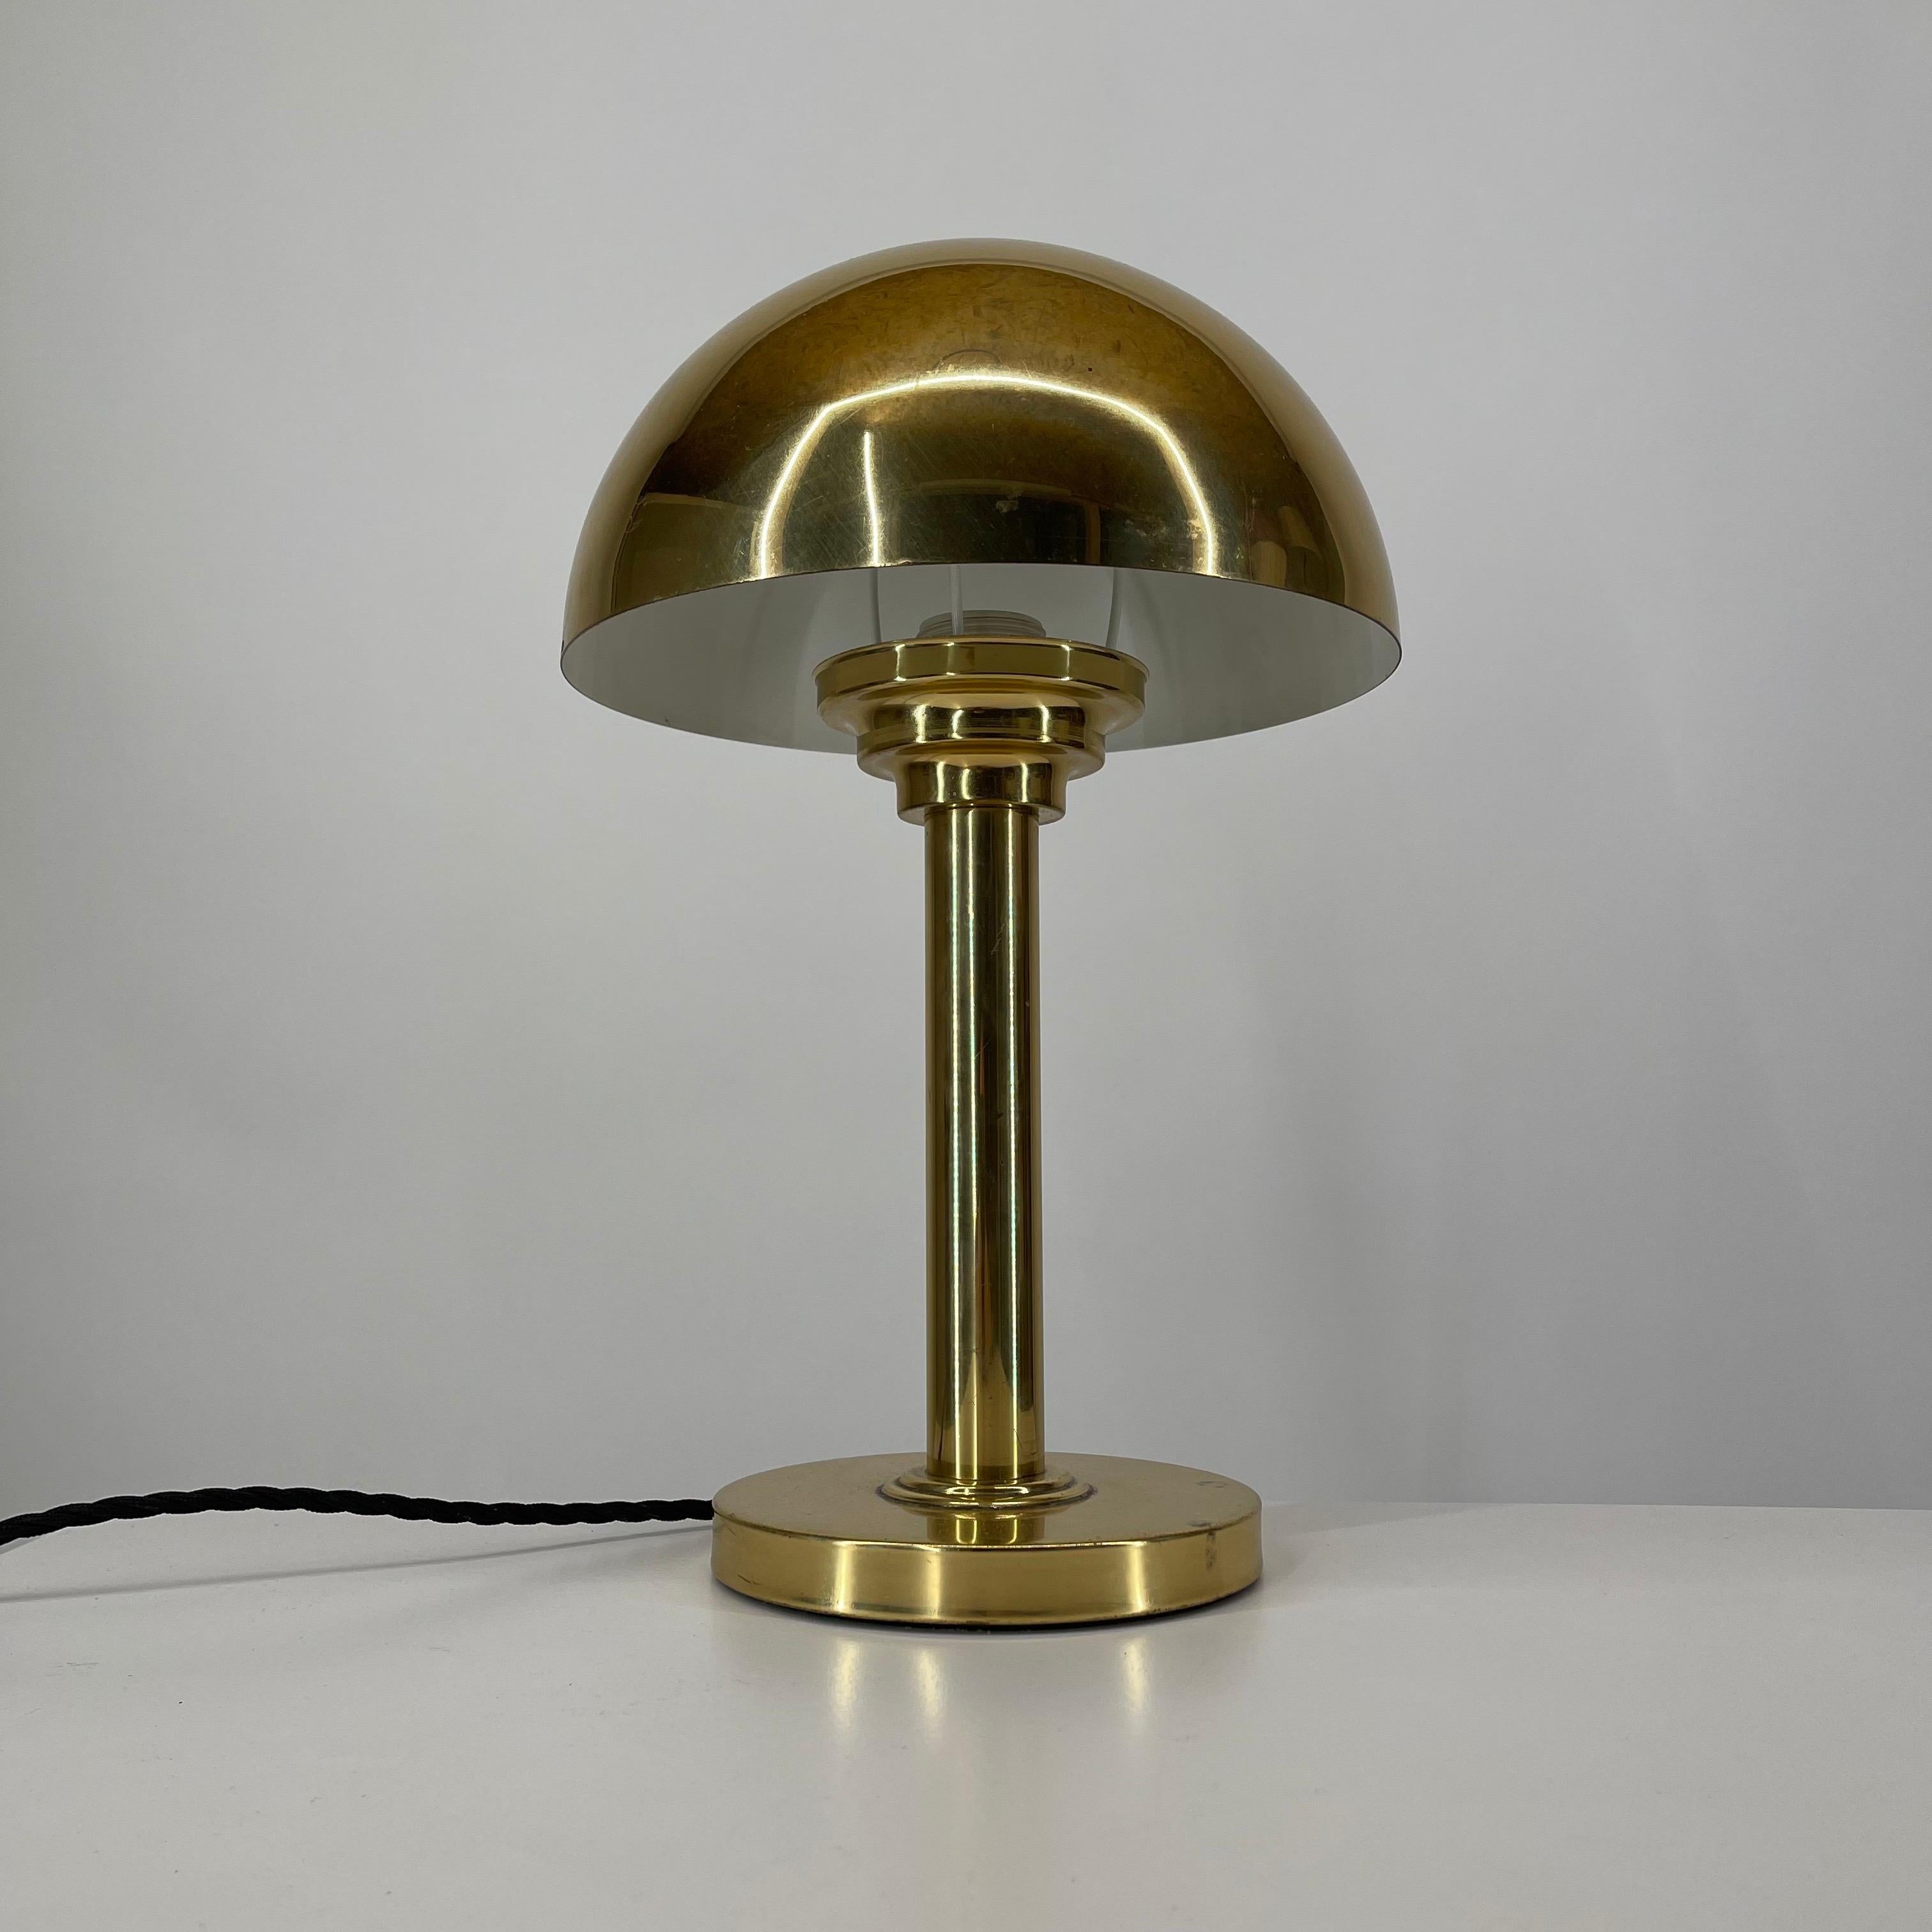 One of 7 Art Deco brass mushroom table lamps, Austria, 1970s. Patinated brass. Rewired with cloth cable.